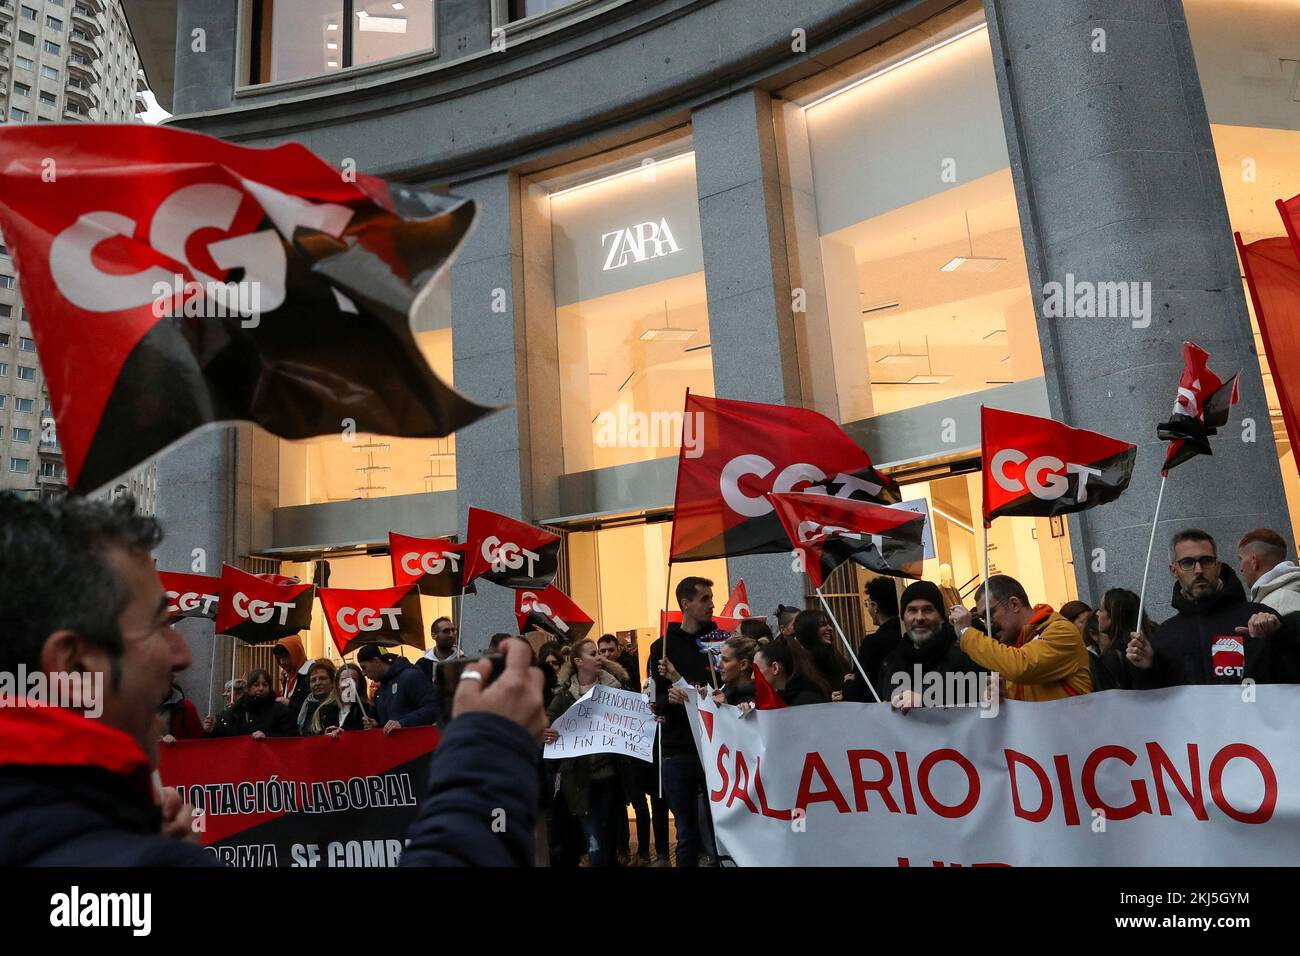 People hold flags from Spain's CGT labour union as they protest outside a  Zara clothing store, an Inditex brand, in Madrid, Spain, February 25, 2021.  REUTERS/Susana Vera Stock Photo - Alamy